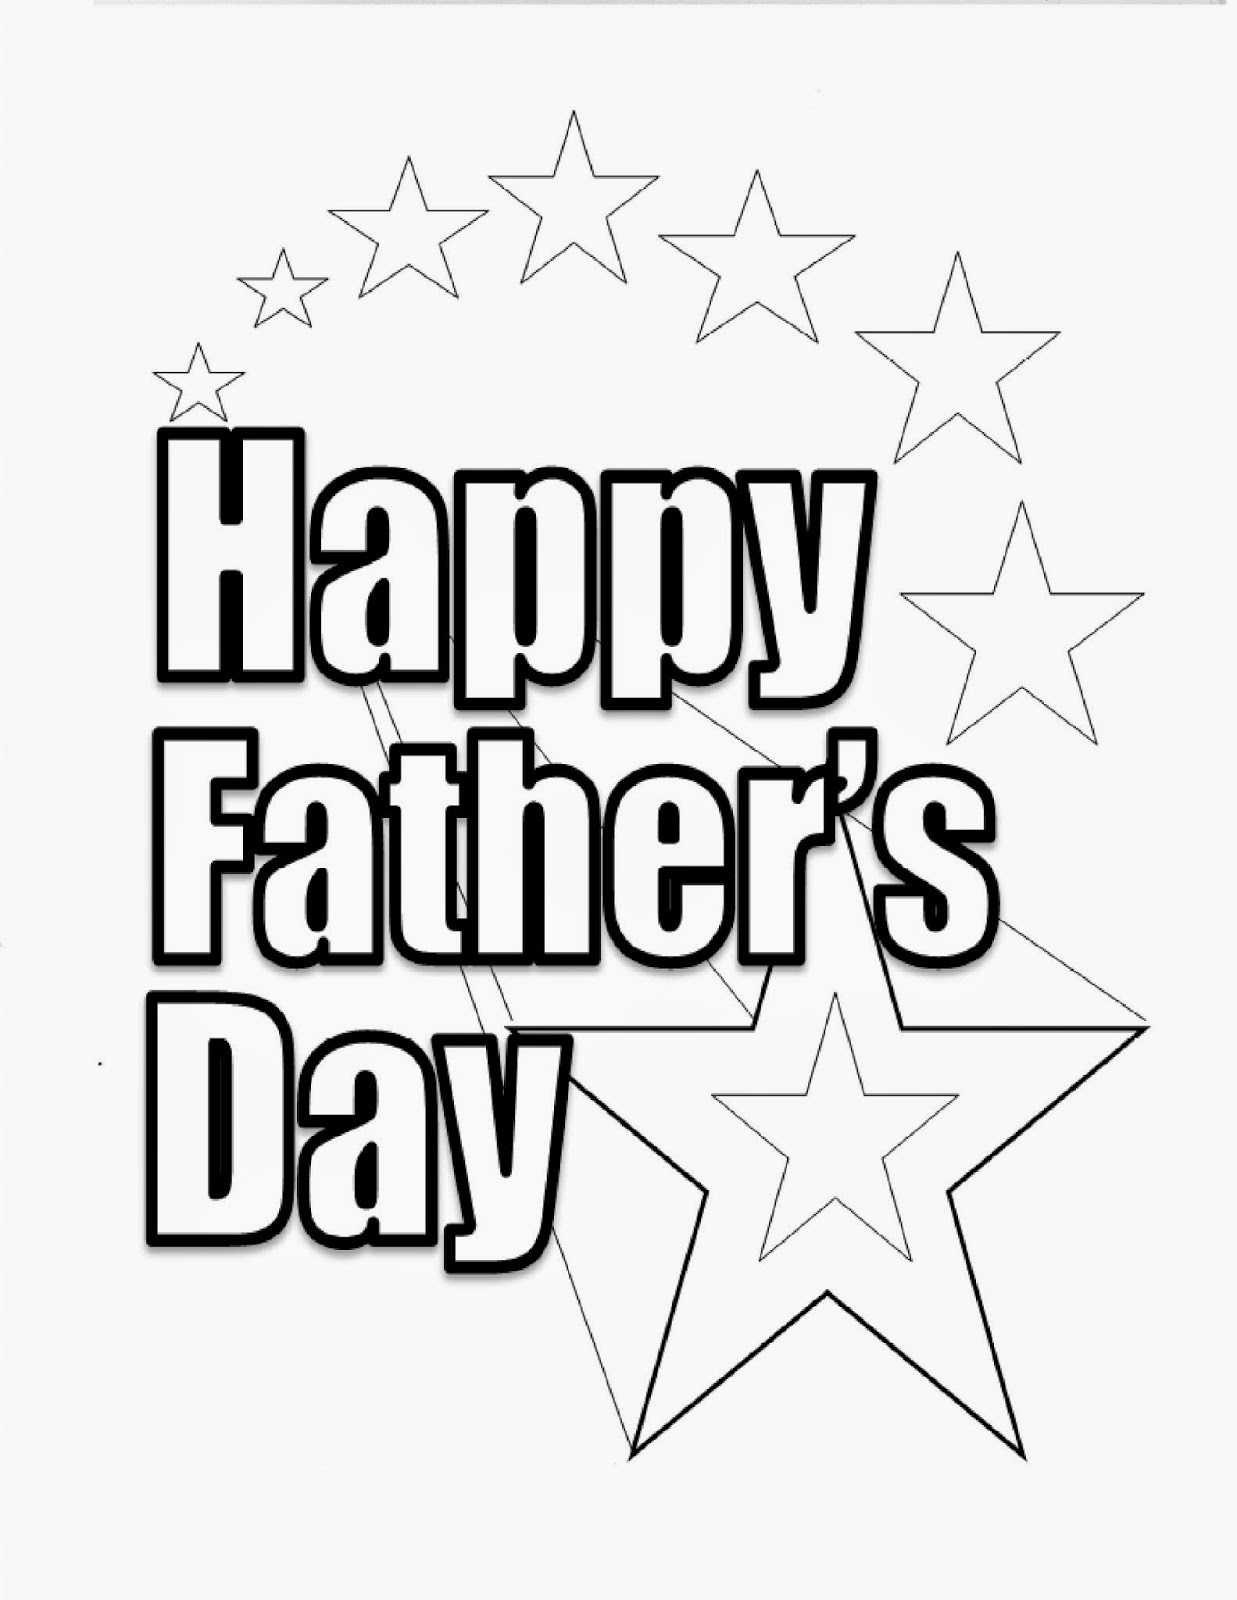 let-it-shine-father-s-day-coloring-pages